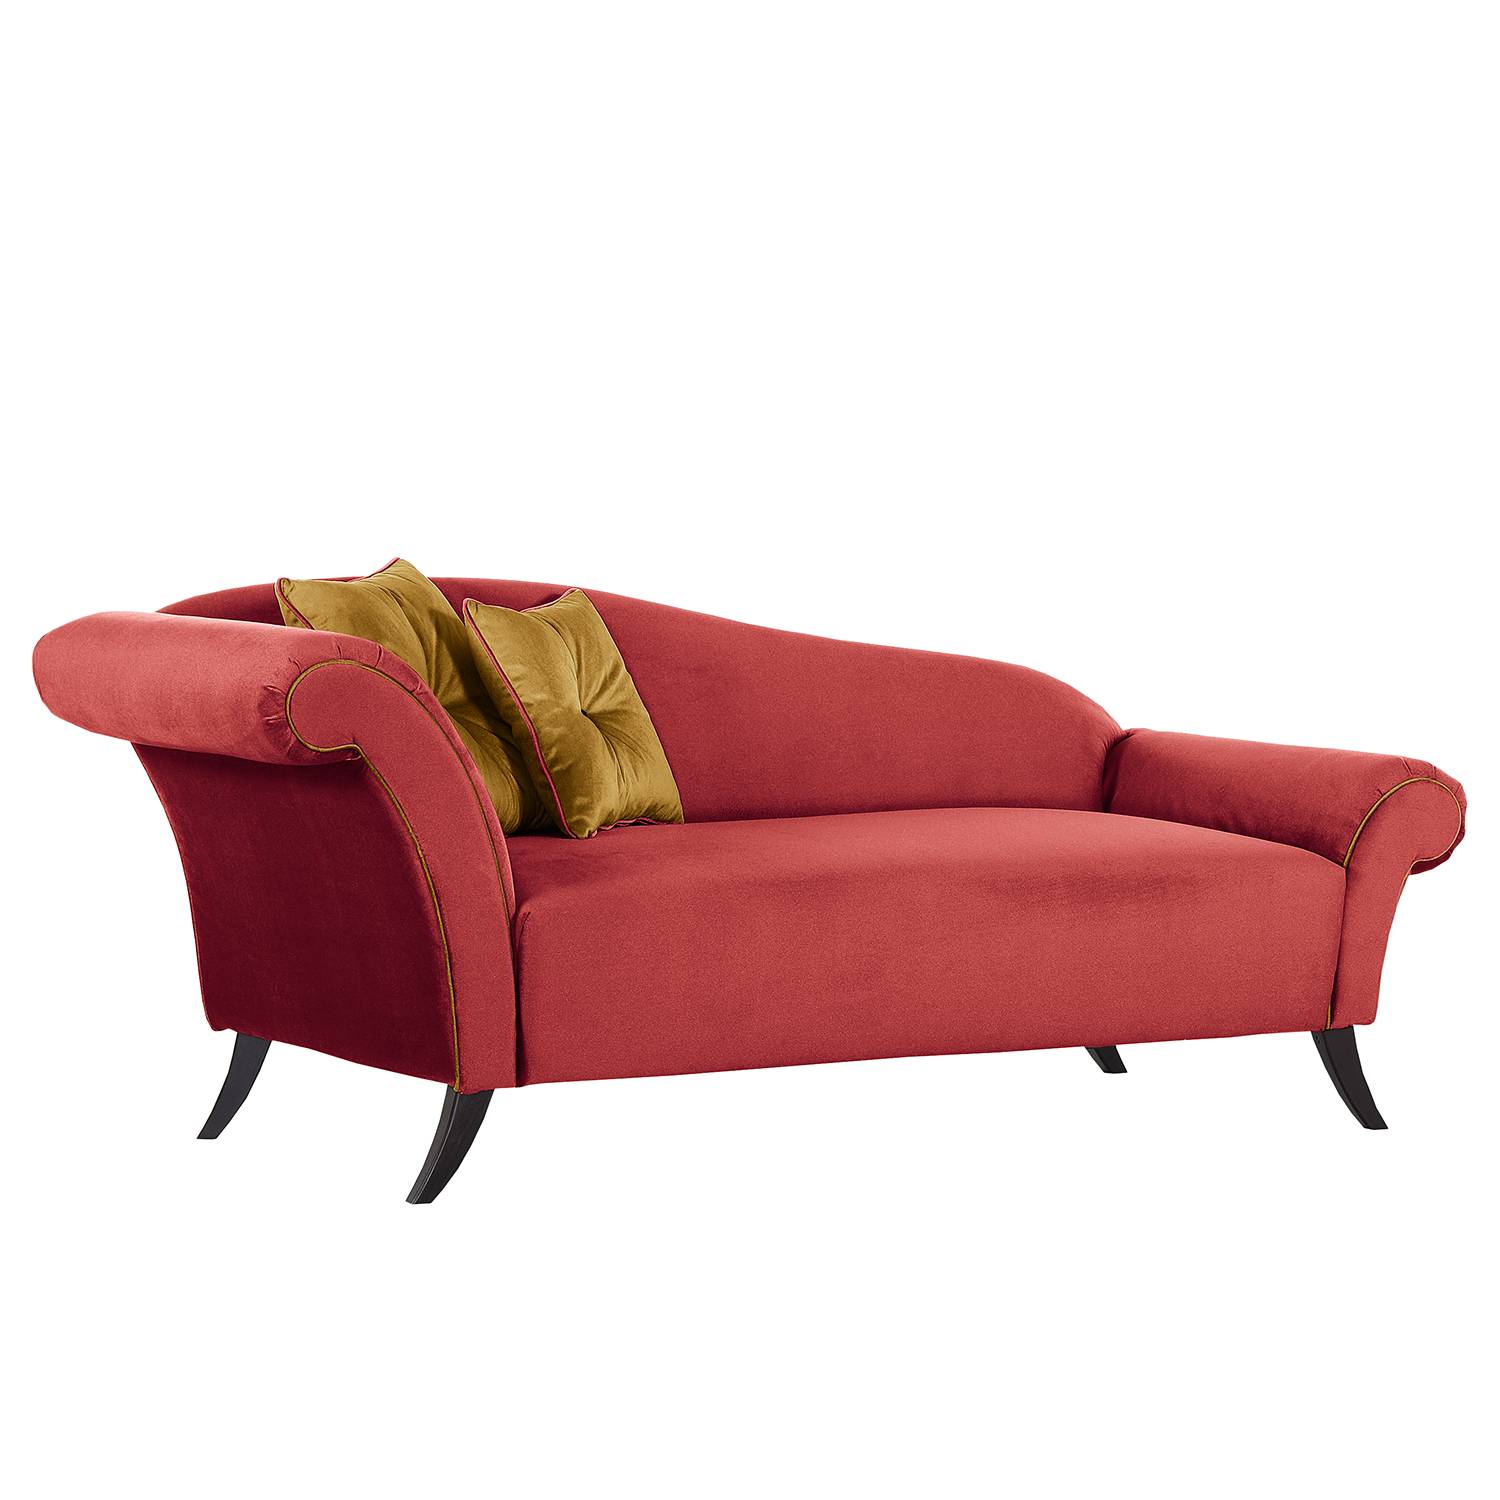 Home24 Chaise longue Mound, Red Living